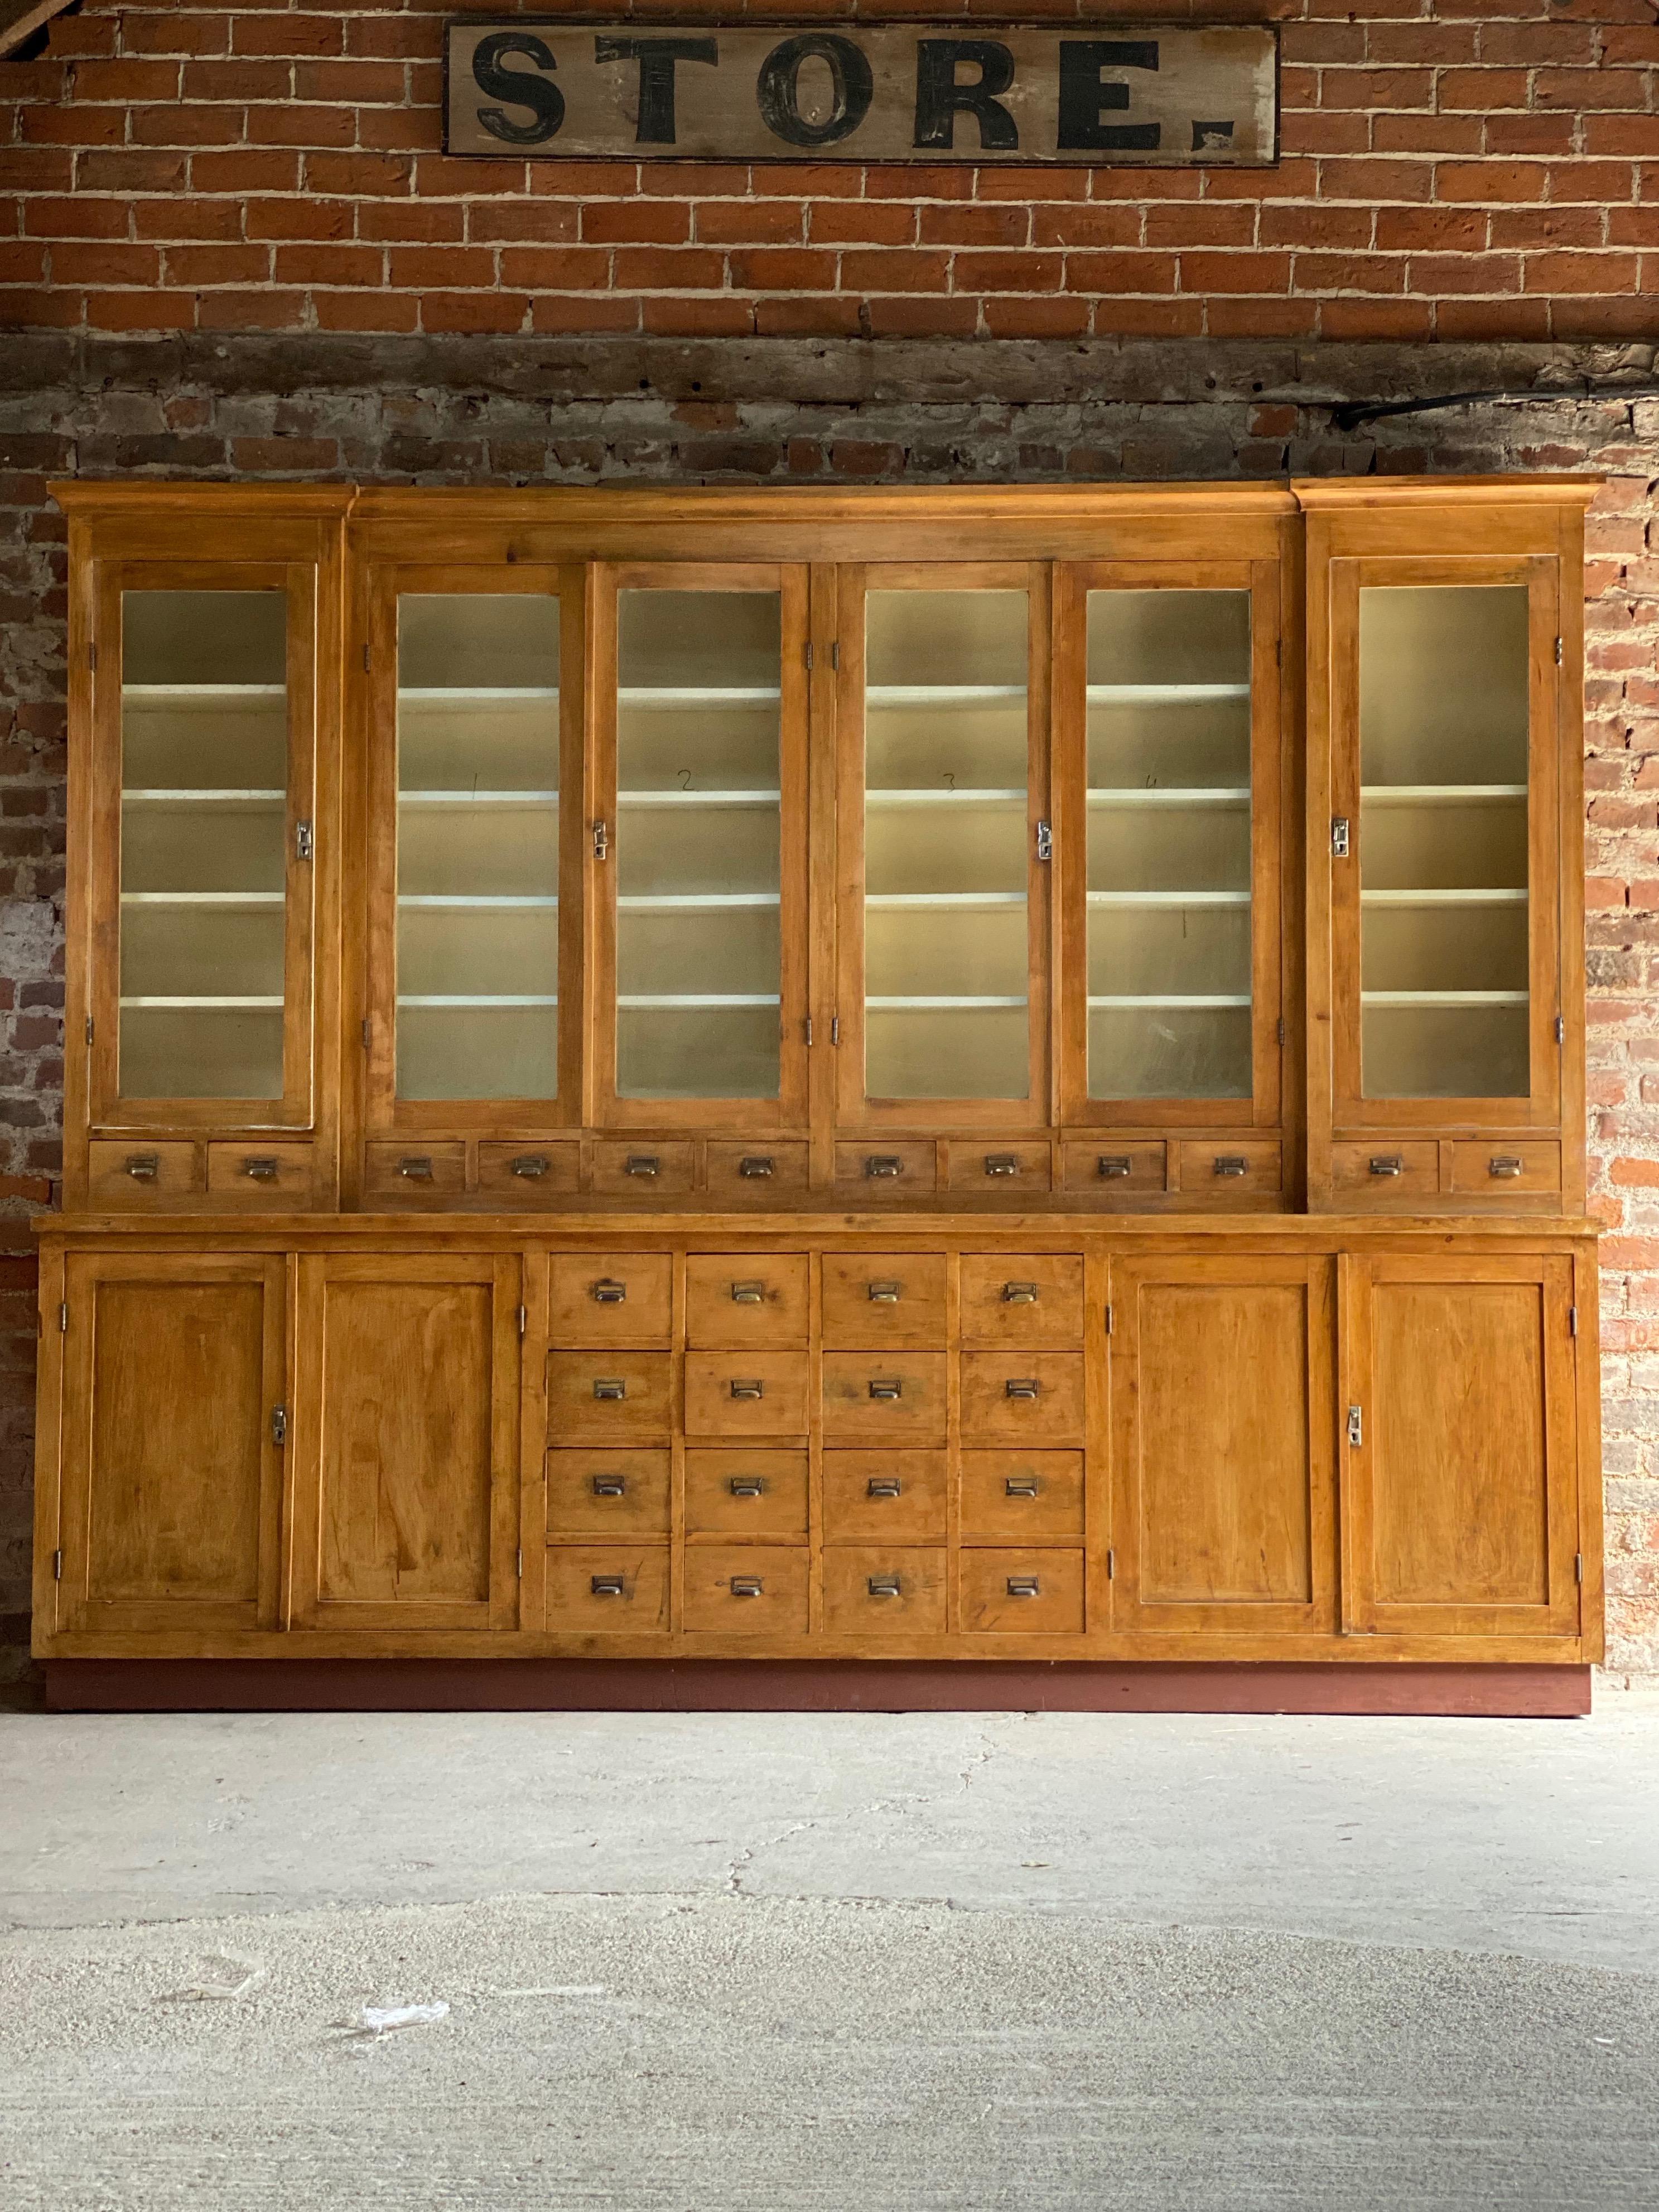 Large apothecary display cabinet pharmacy chemist shop circa 1920s number 2

Magnificent breakfront Apothecary Pharmacy beech display cabinet dating to circa 1920s, This piece is one of six similar pieces all from the same pharmacy, the upper